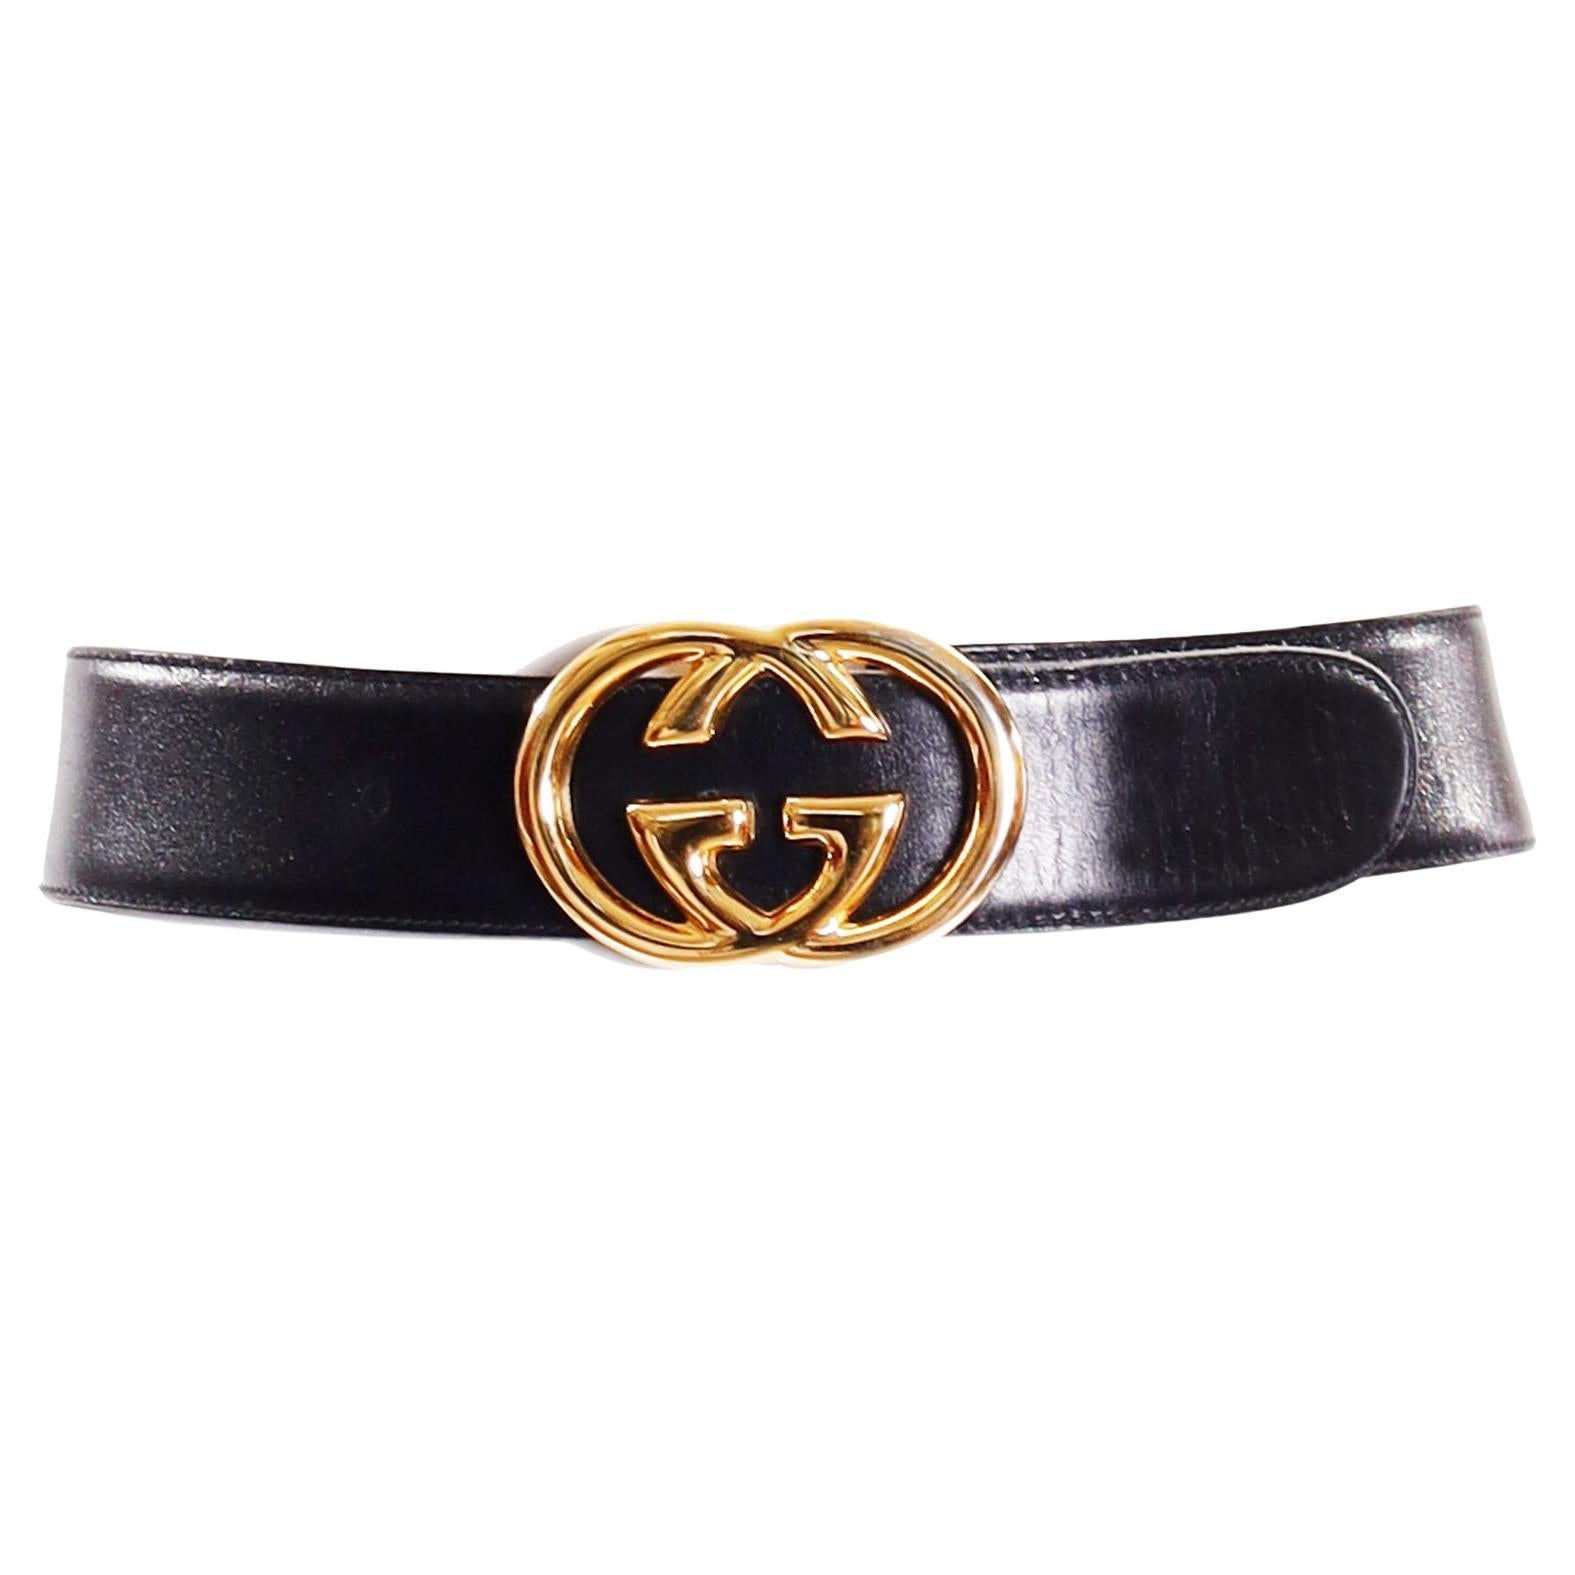 Vintage Gucci Black Leather Belt with Gold Double G Buckle 75-30 at 1stDibs  | gucci black and gold belt, double g gucci belt, vintage gucci belt buckle